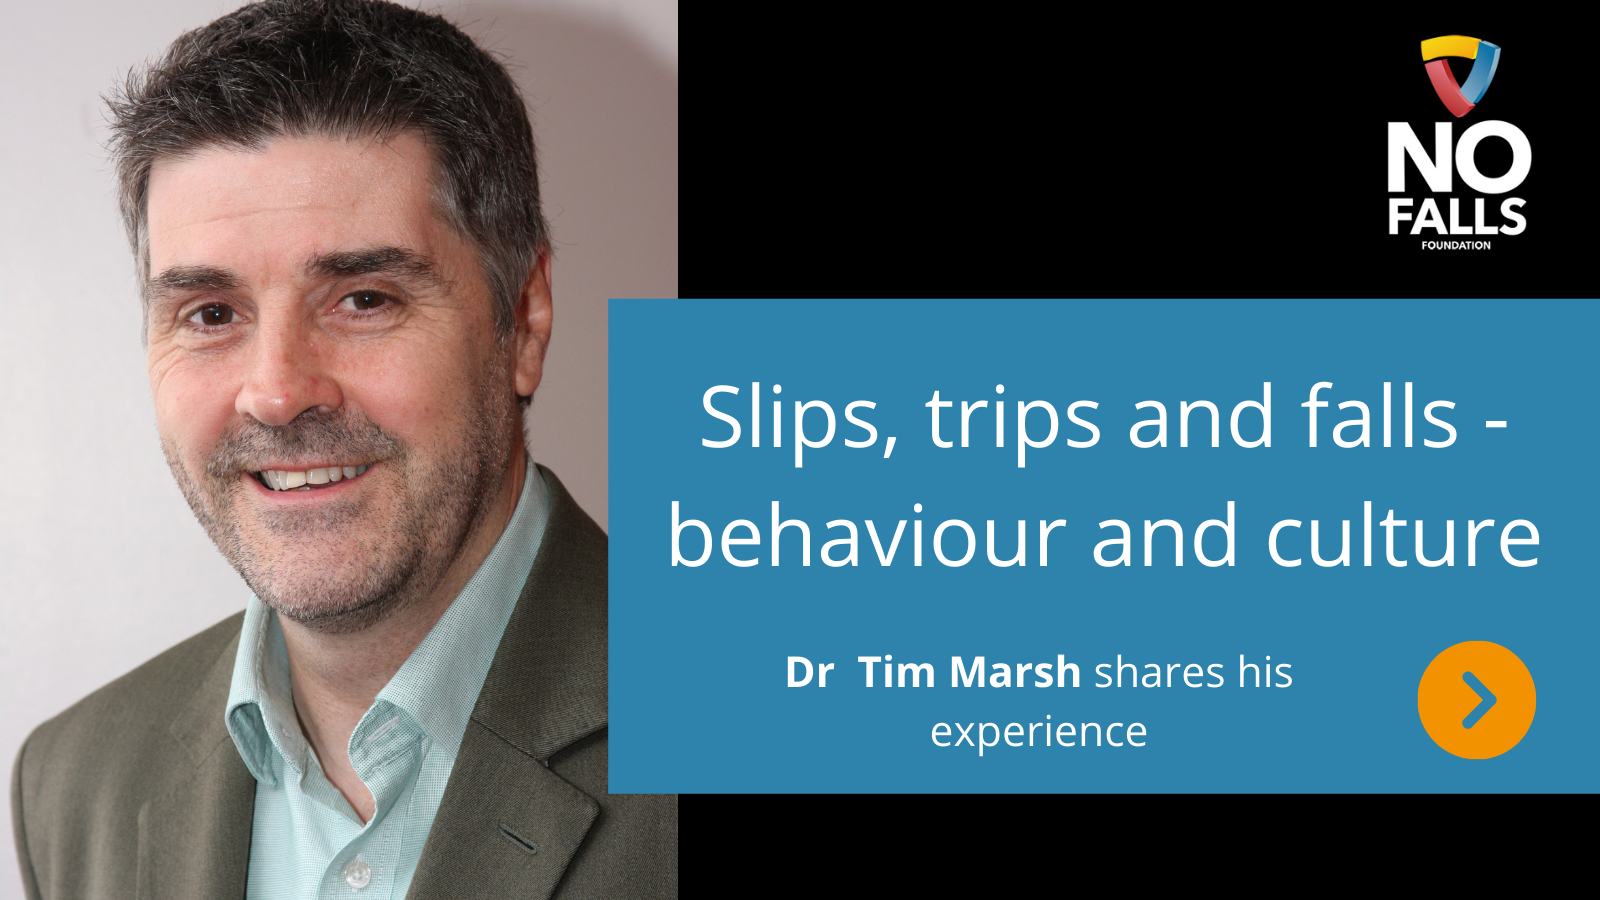 Slips, trips and falls - behaviour and culture